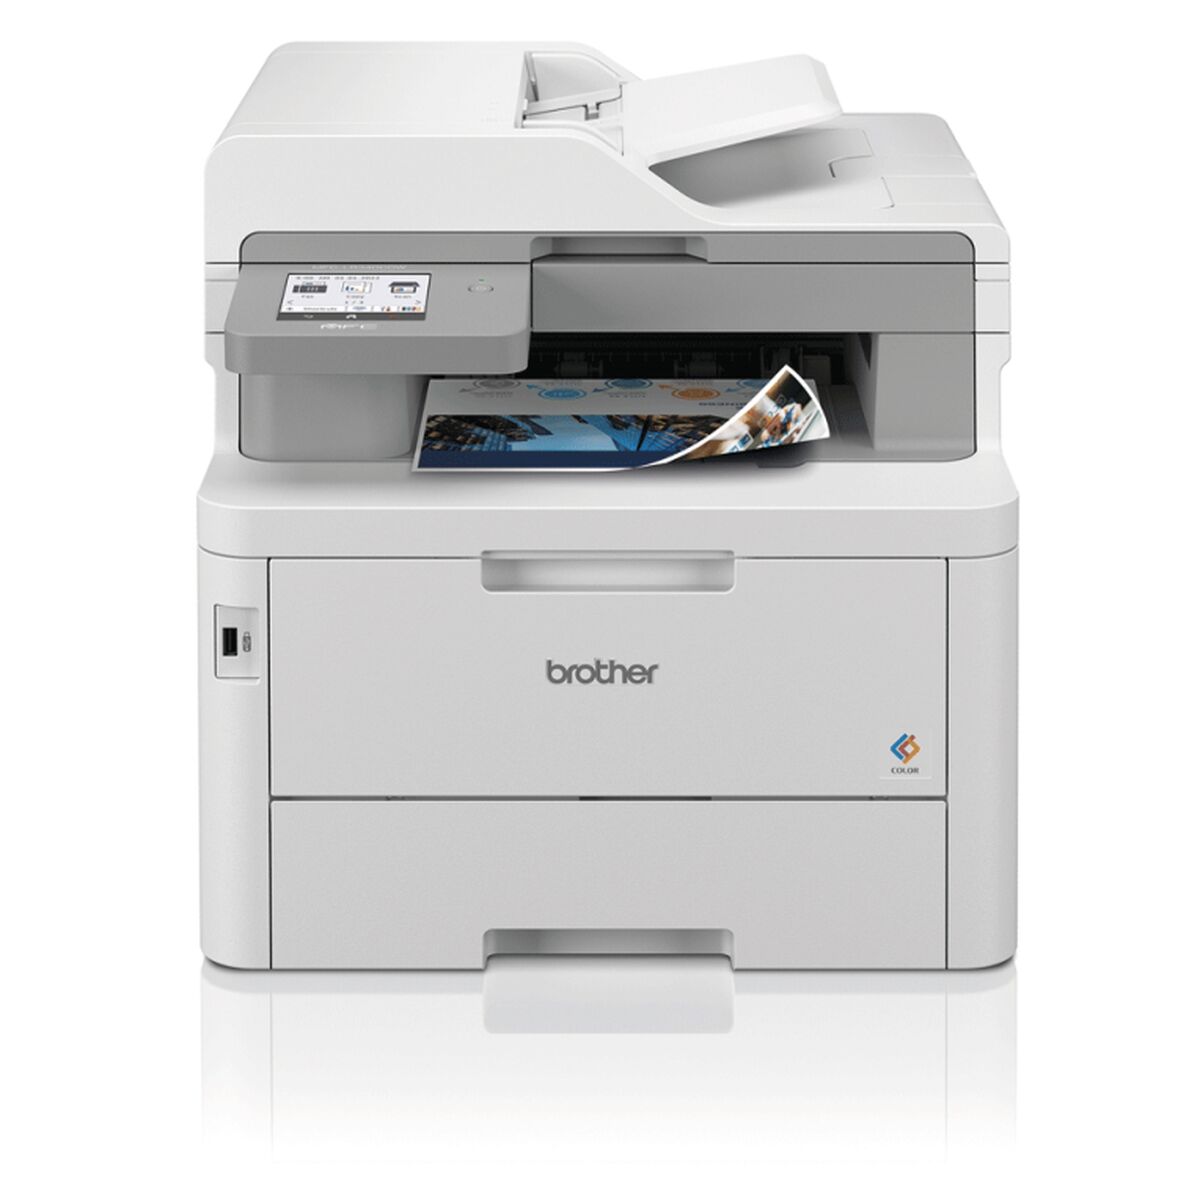 Laser Printer Brother MFC-L8340CDW, Brother, Computing, Printers and accessories, laser-printer-brother-mfc-l8340cdw, Brand_Brother, category-reference-2609, category-reference-2642, category-reference-2645, category-reference-t-19685, category-reference-t-19911, category-reference-t-21378, category-reference-t-25690, computers / peripherals, Condition_NEW, office, Price_500 - 600, Teleworking, RiotNook